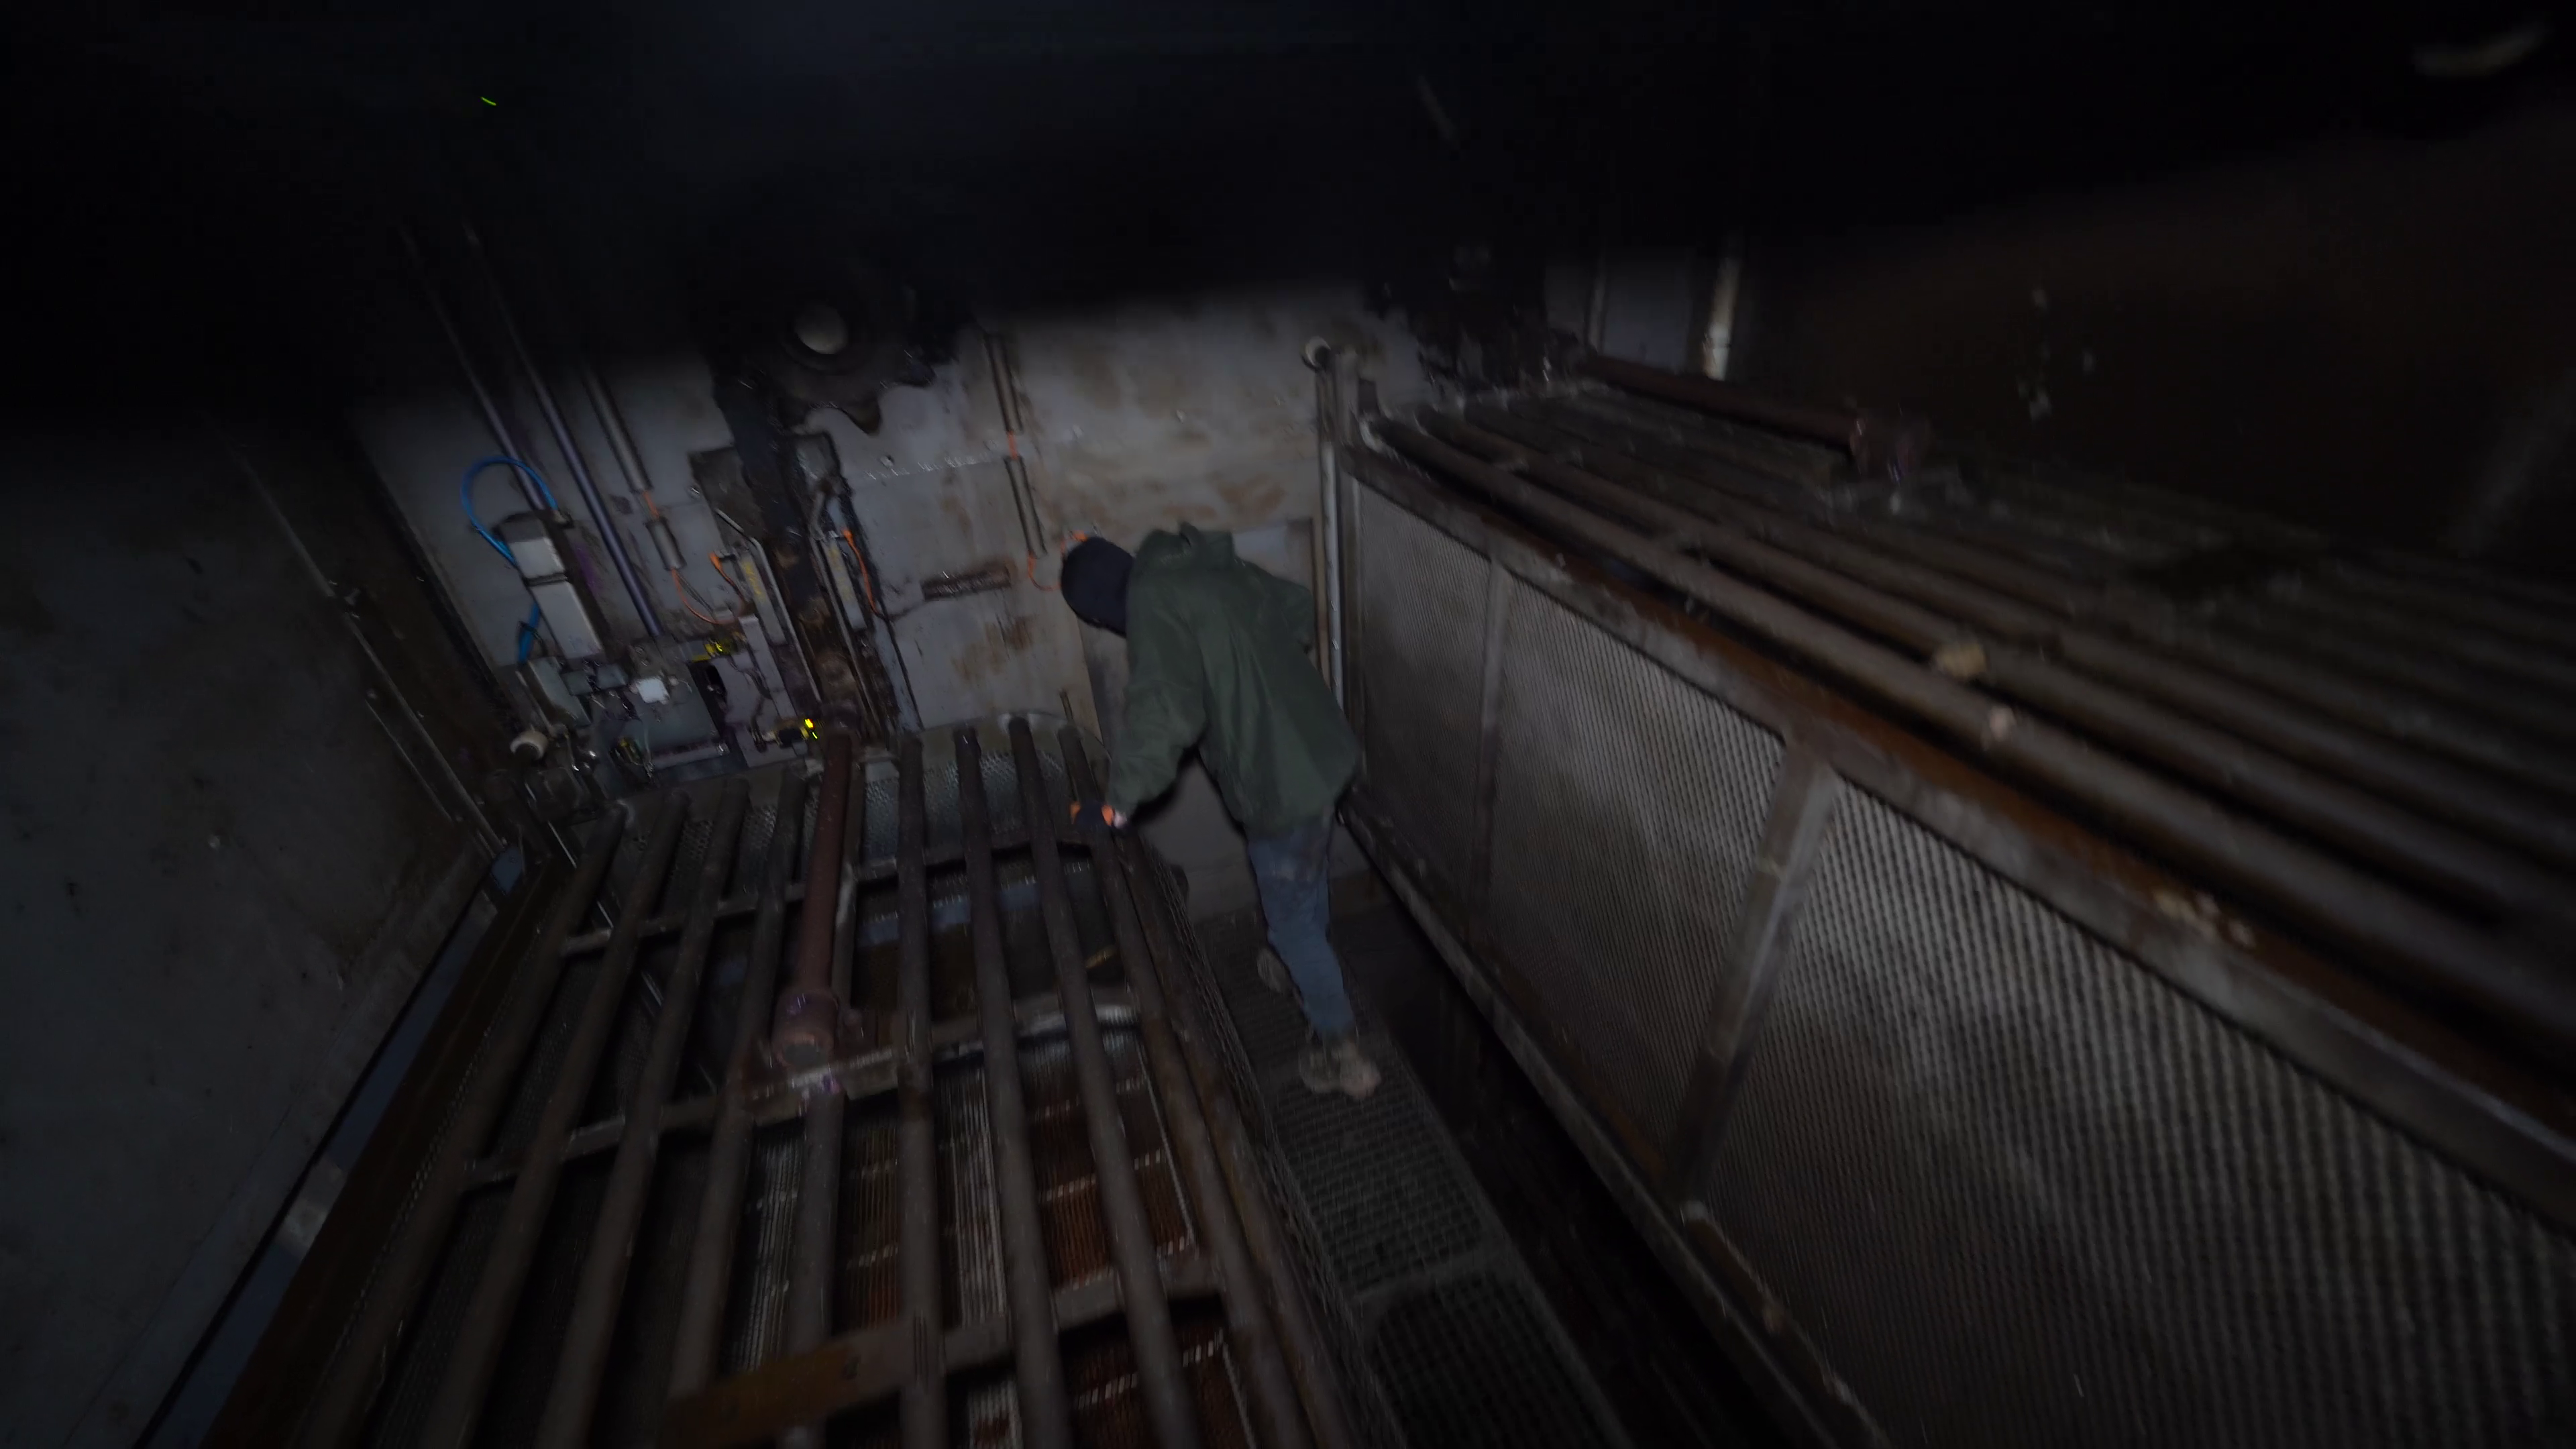 An investigator stands inside the backloader gas chamber